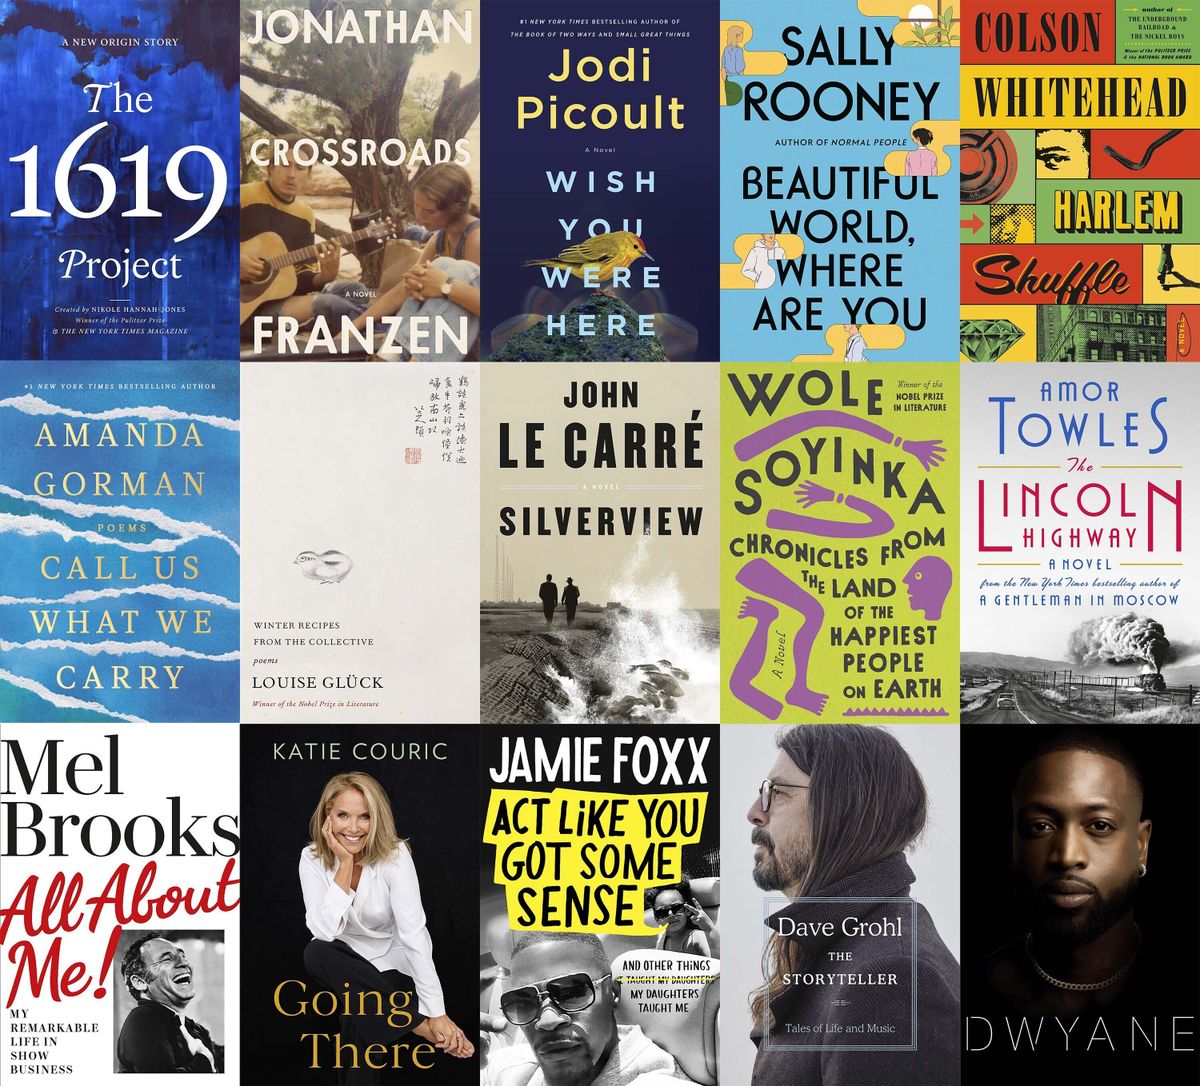 This combination of book cover images shows cover art for upcoming releases, top row from left, "The 1619 Project: A New Origin Story" by Nikole Hannah-Jones, releasing Nov. 16 (One World), "Crossroads," a novel by Jonathan Franzen releasing on Oct. 5. (Farrar, Straus and Giroux), "Wish You Were Here," a novel by Jodi Picoult, releasing Nov. 30. (Ballantine), "Beautiful World, Where Are You," a novel by Sally Rooney, releasing Sept. 7. (Farrar, Straus and Giroux), and "Harlem Shuffle" by Colson Whitehead, releasing Sept. 14. (Doubleday), middle row from left, "Call Us What We Carry," poems by Amanda Gorman, releasing Dec. 7. (Viking Books), "Winter Recipes from the Collective: Poems" by Louise Glück, releasing Oct. 20. (Farrar, Straus and Giroux), "Silverview," a novel by John le Carré, releasing Oct. 12. (Viking), "Chronicles from the Land of the Happiest People on Earth," a novel by Wole Soyinka, releasing Sept. 28. (Pantheon), and "The Lincoln Highway," a novel by Amor Towles releasing Oct. 5. (Viking), bottom row from left, "All About Me: My Remarkable Life in Show Business" by Mel Brooks. The book will be released on Nov. 30. (Ballantine), "Going There," a memoir by Katie Couric, releasing Oct. 26. ( Little, Brown and Company), "Act Like You Got Some Sense: And Other Things My Daughters Taught Me," a memoir by Janie Foxx, releasing Oct. 19. (Grand Central Publishing), "The Storyteller: Tales of Life and Music" by Dave Grohl. (Dey Street Books) and "Dwyane," a memoir by Dwyane Wade, releasing on Nov. 16. (William Morrow).  (HONS)